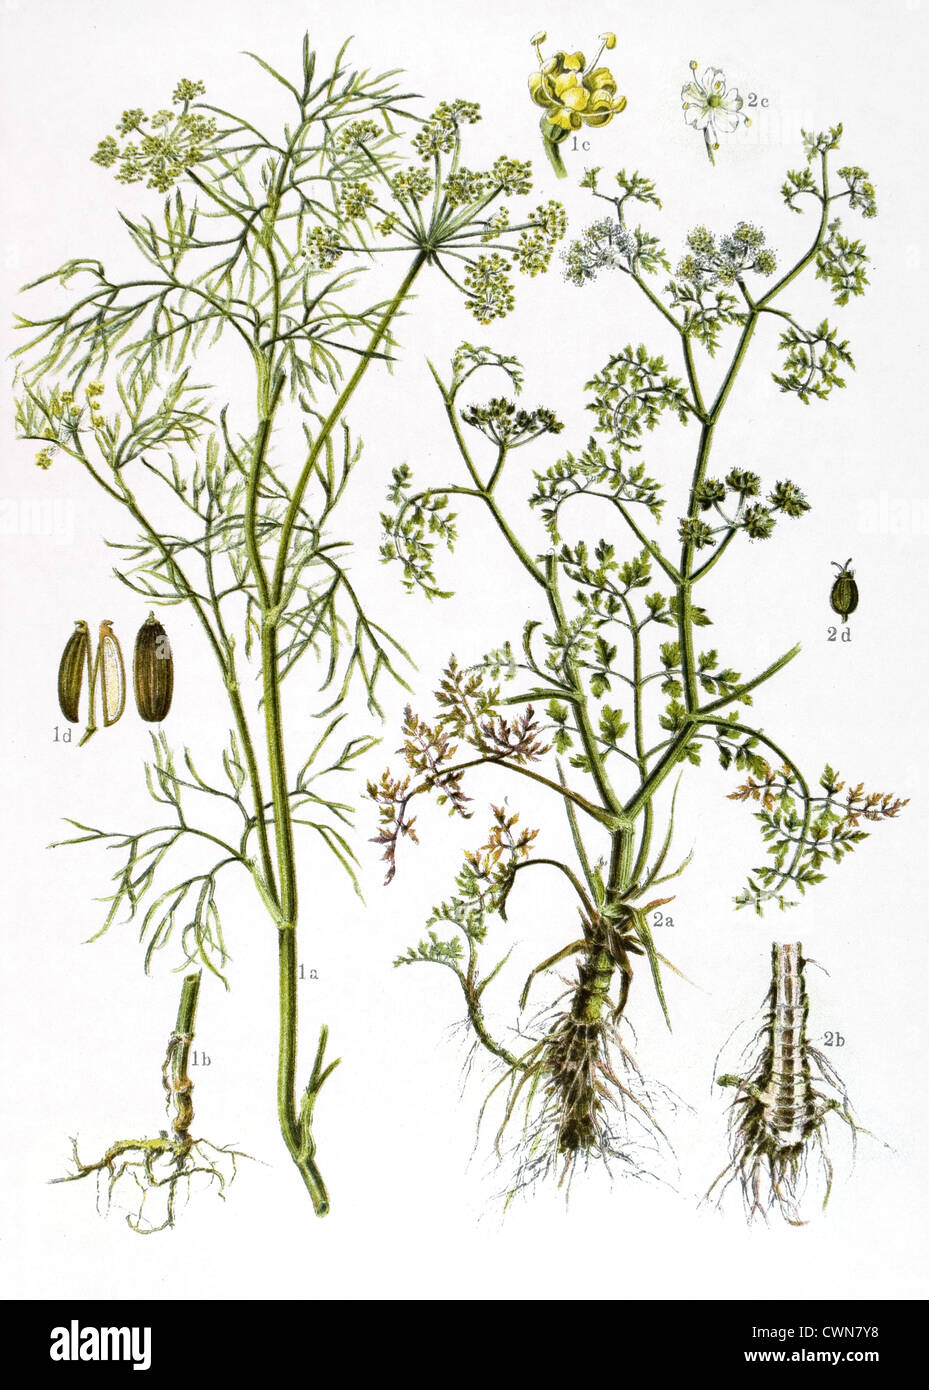 Fennel and other herbs Stock Photo